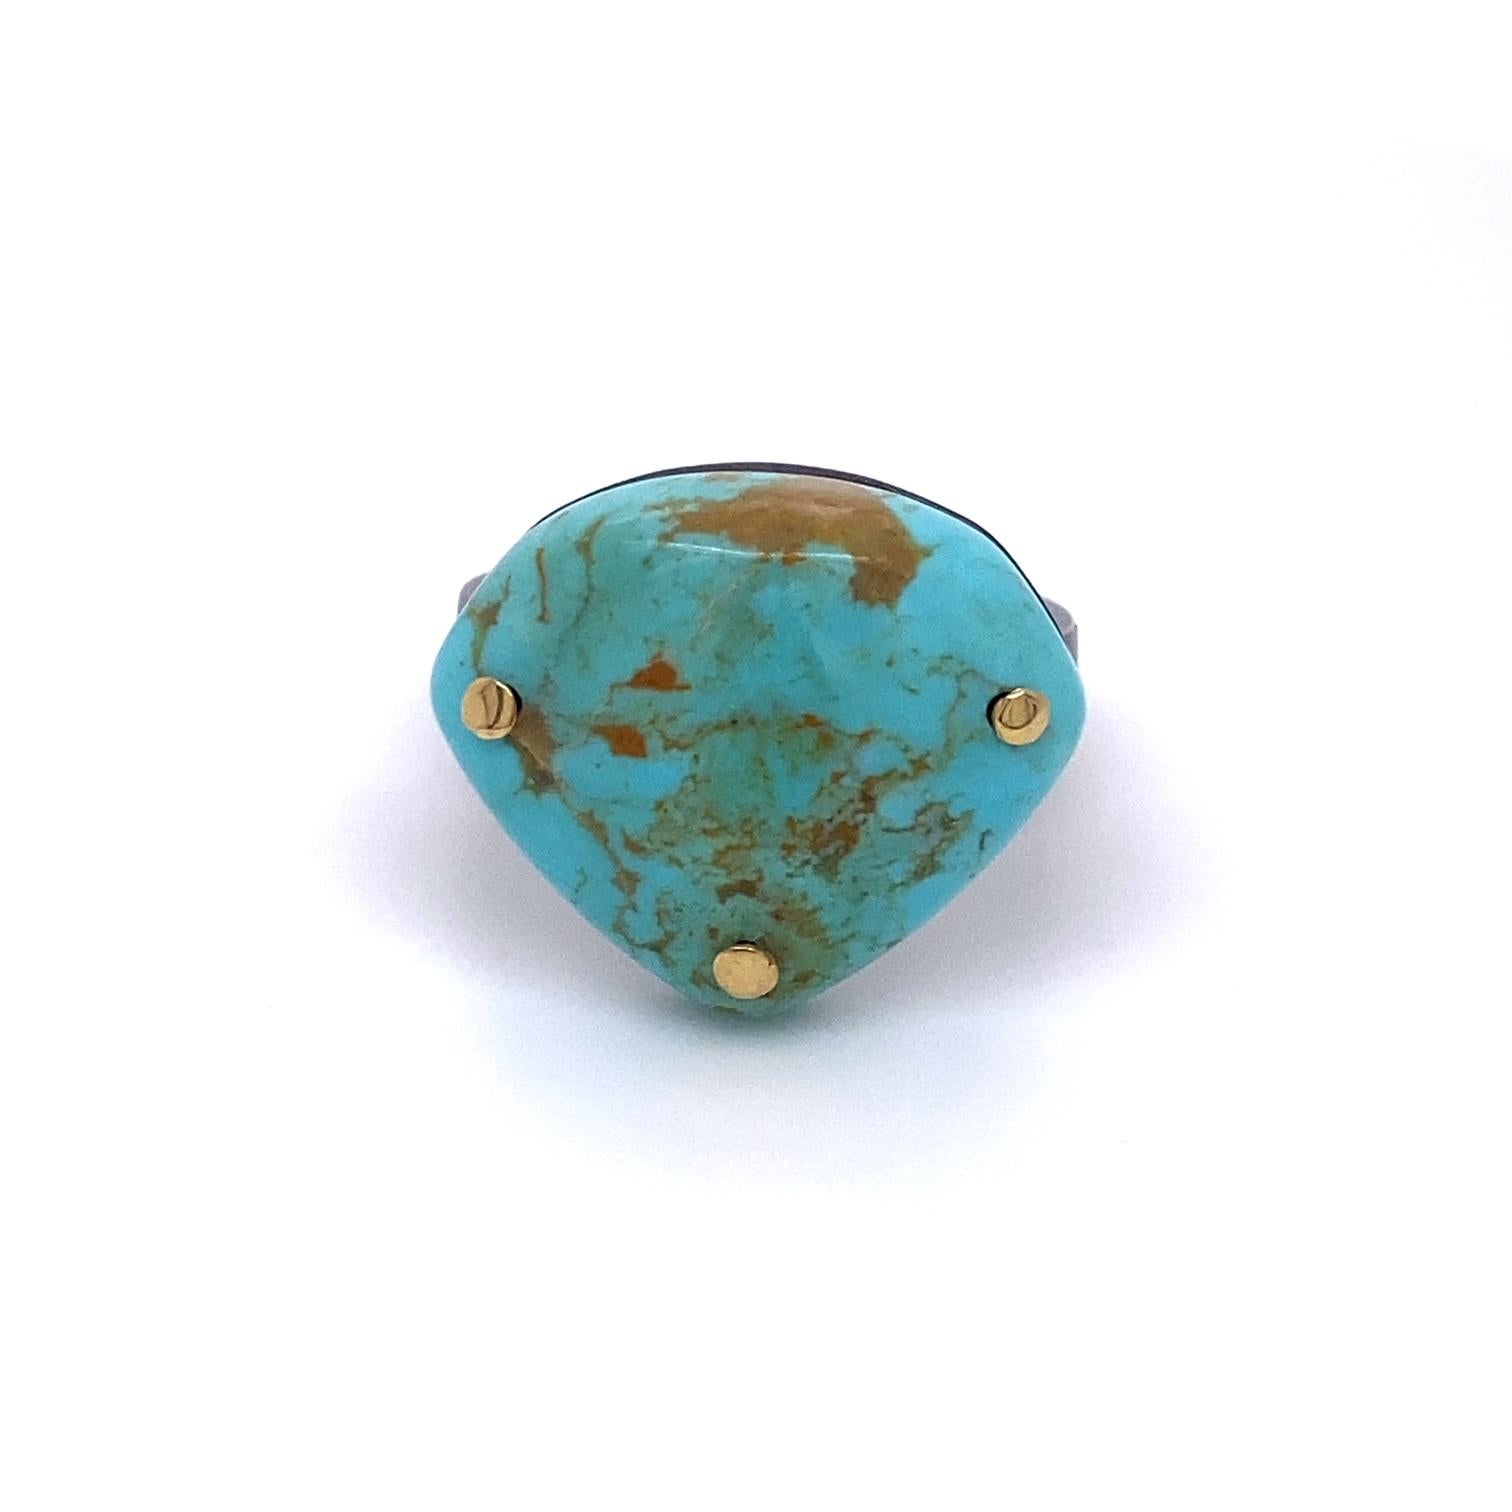 An oxidized sterling silver and 18k yellow gold with one shield shaped Kingman turquoise. Ring size 7.5. This ring was made and designed by llyn strong.